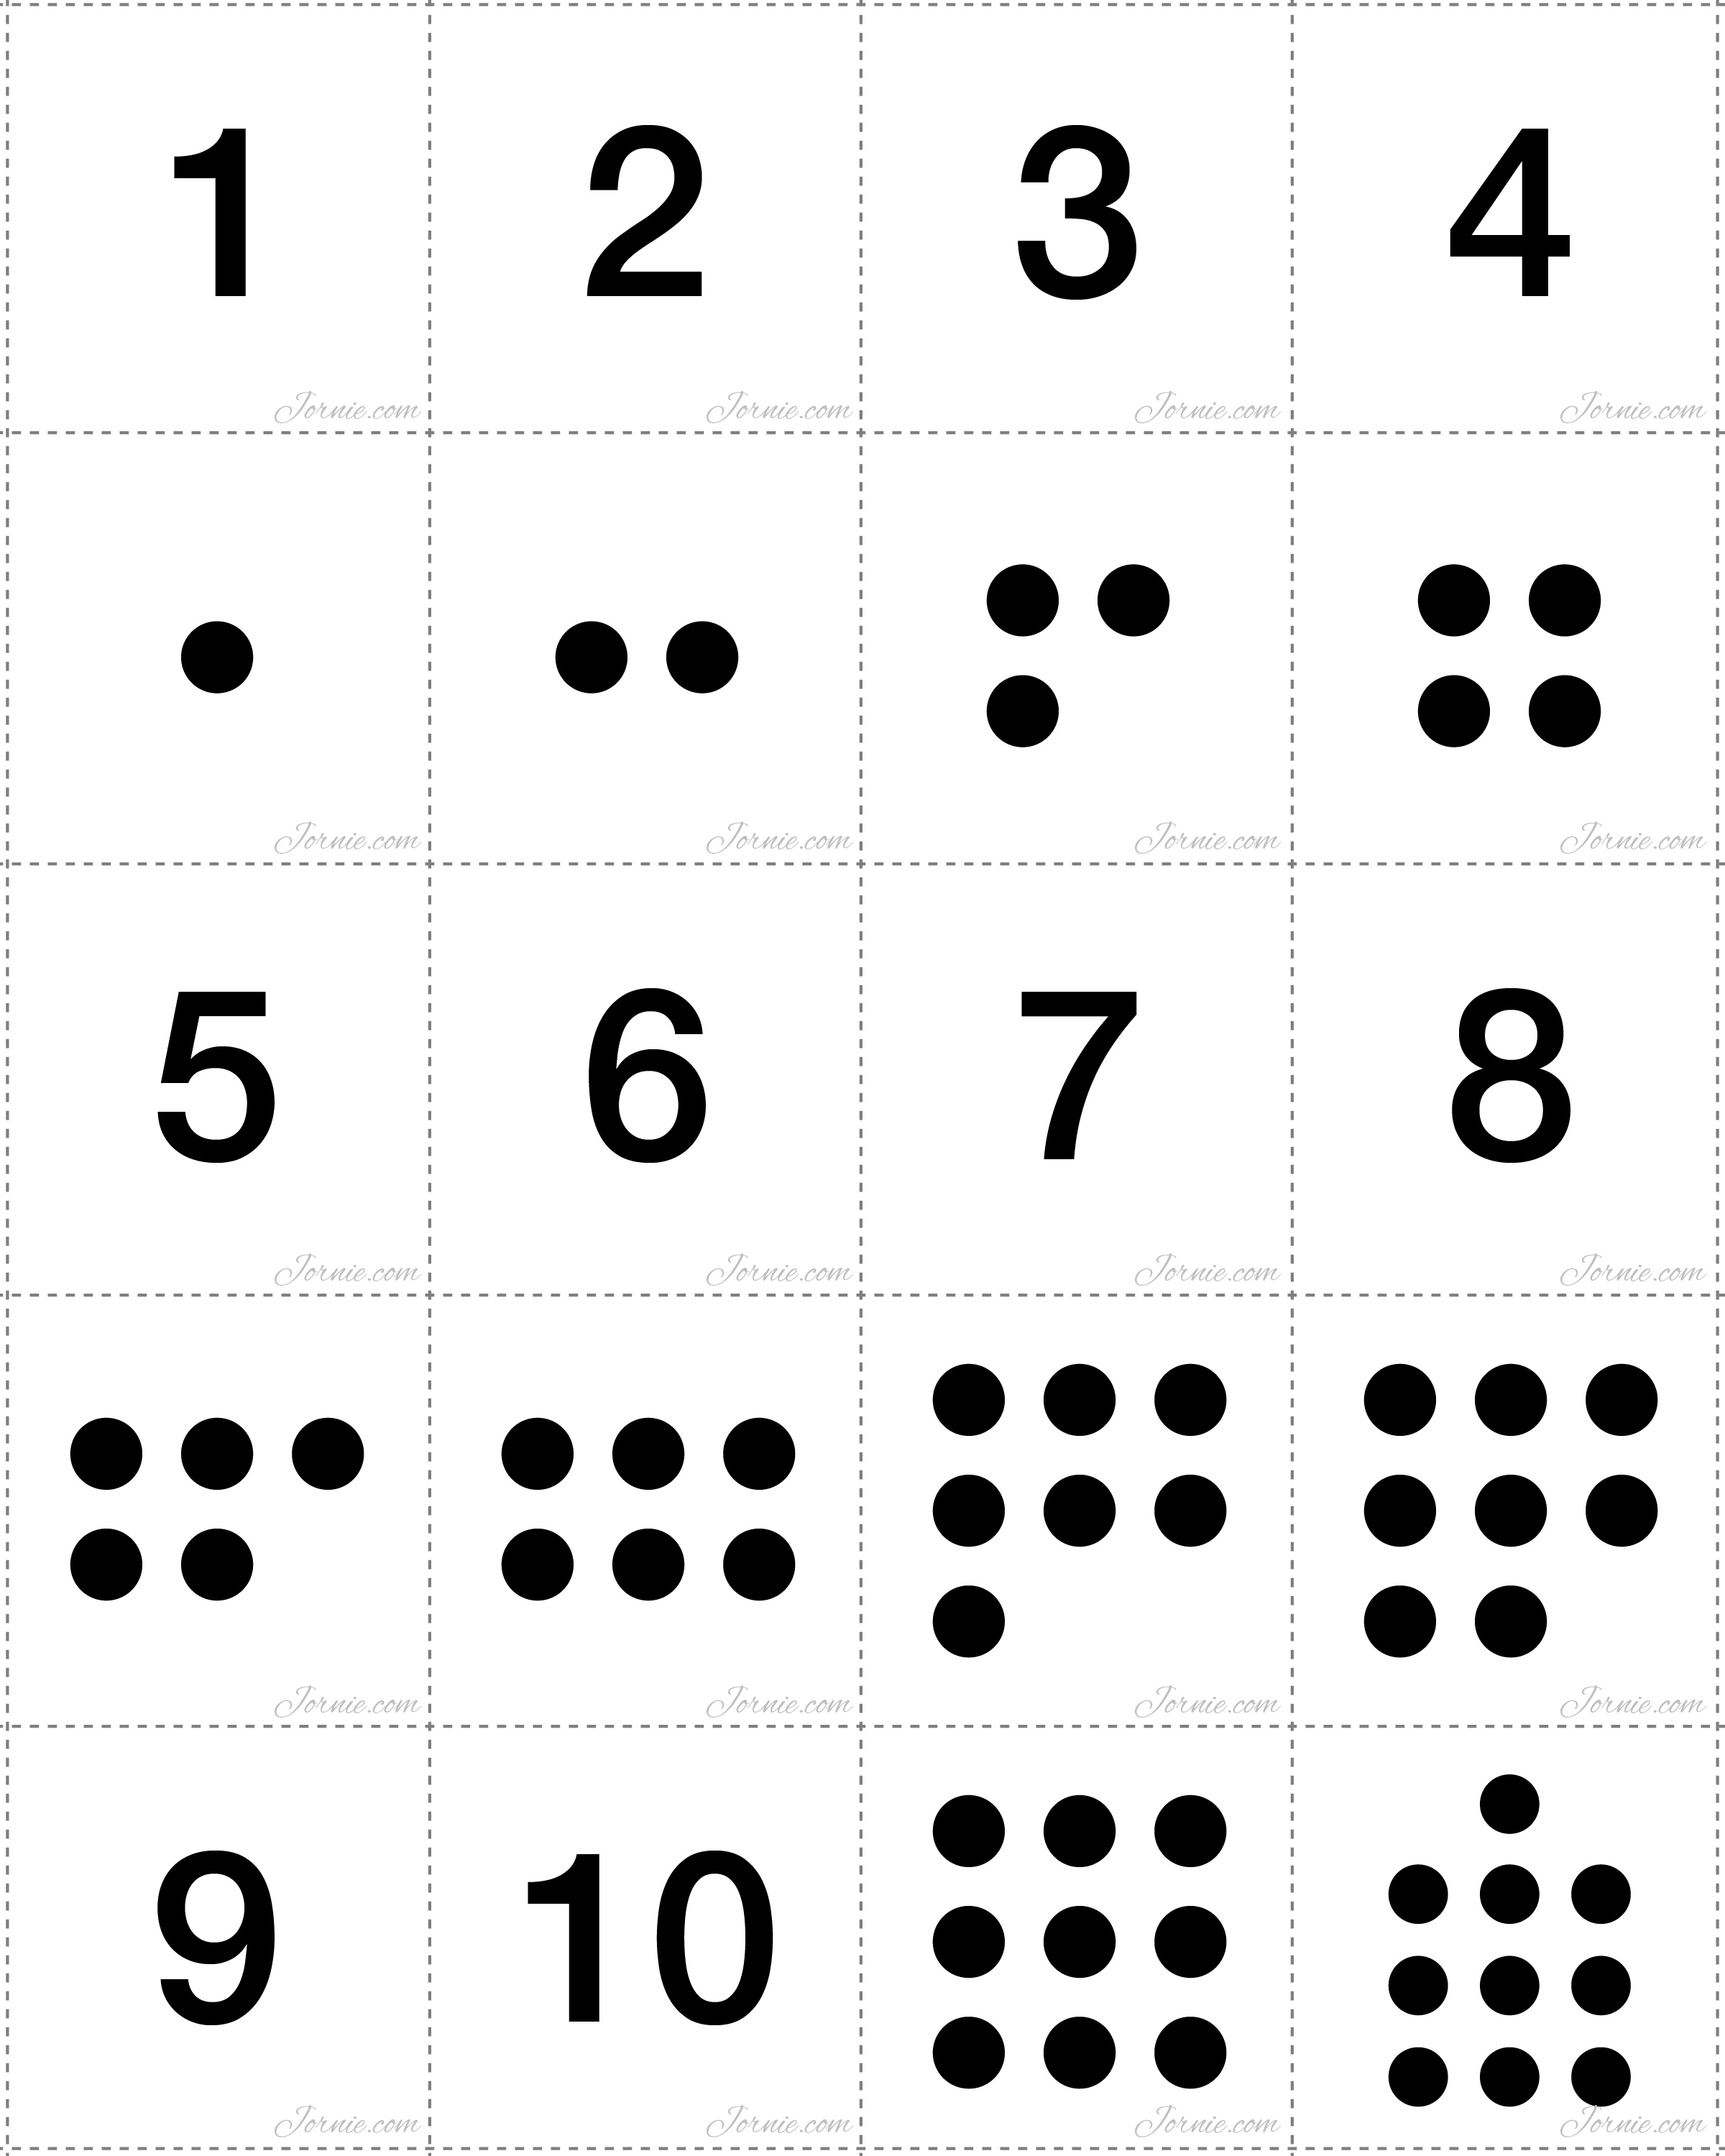 5-best-images-of-printable-dot-cards-1-10-free-printable-numbers-1-10-free-printable-number